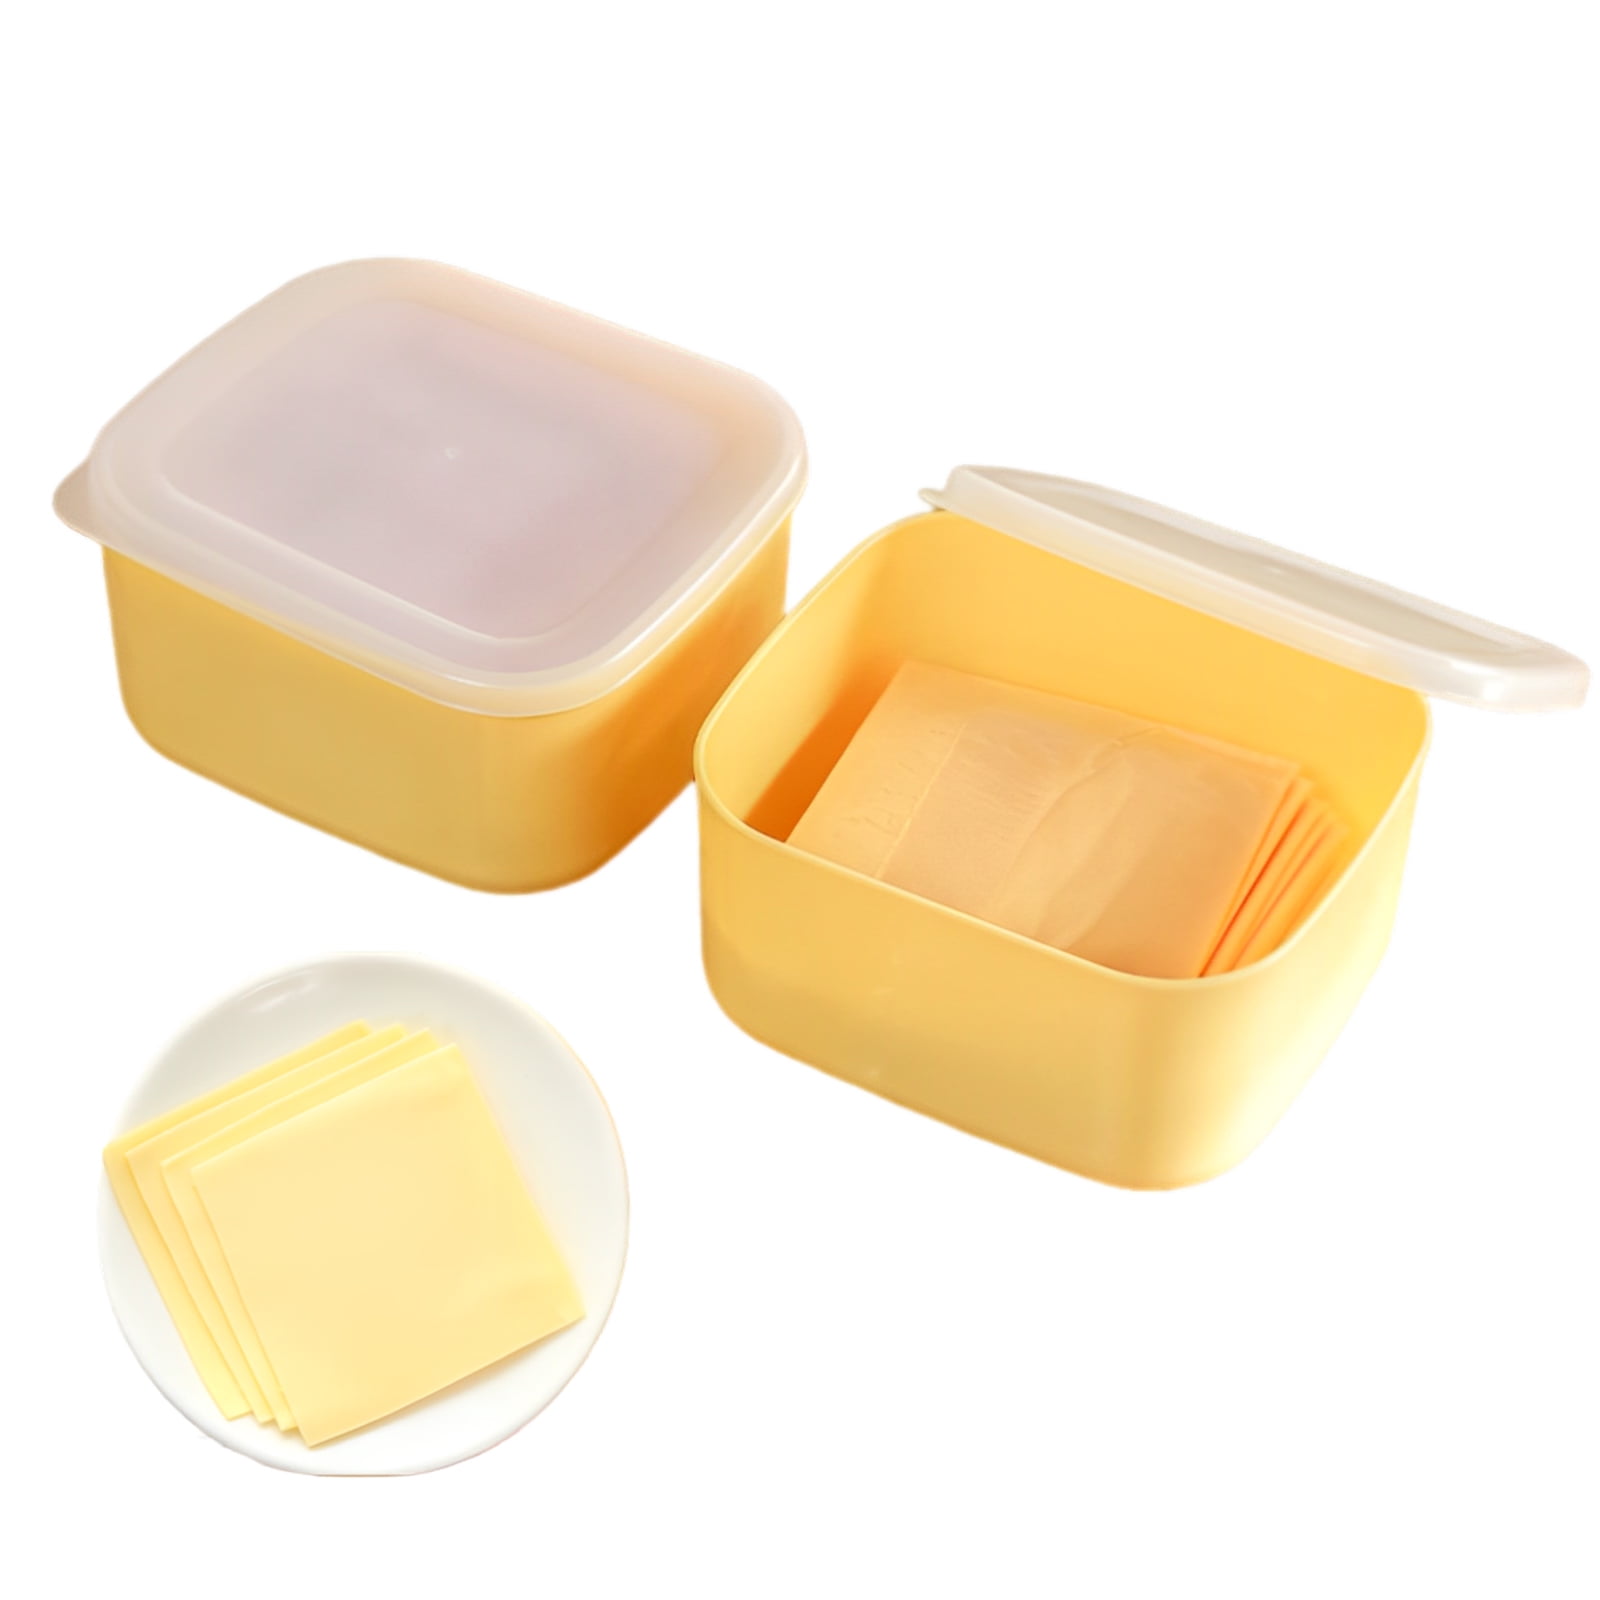 Klee 2 pc Stainless Steel Food Storage Container Set With Lids - Easy  Clean, Smell-Proof, Airtight & Leakproof Containers - Large and Extra Large